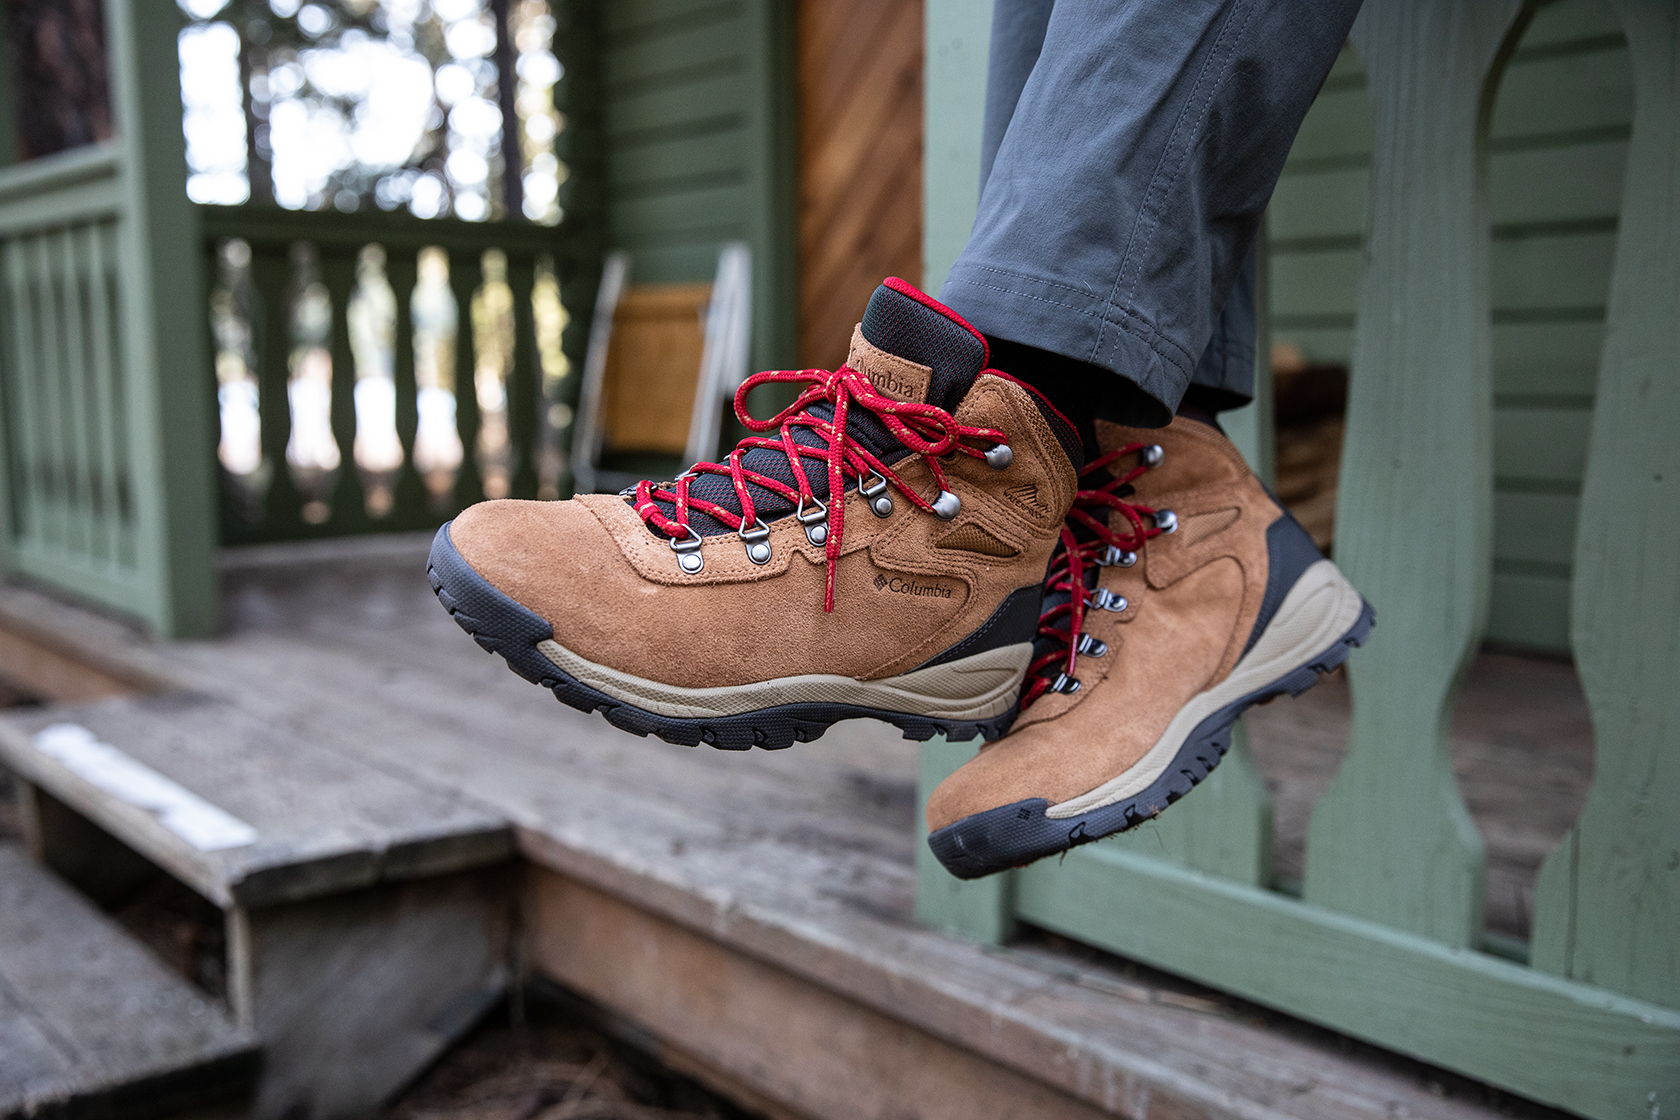 Waterproof or Not? Choosing the Right Hiking Boot.